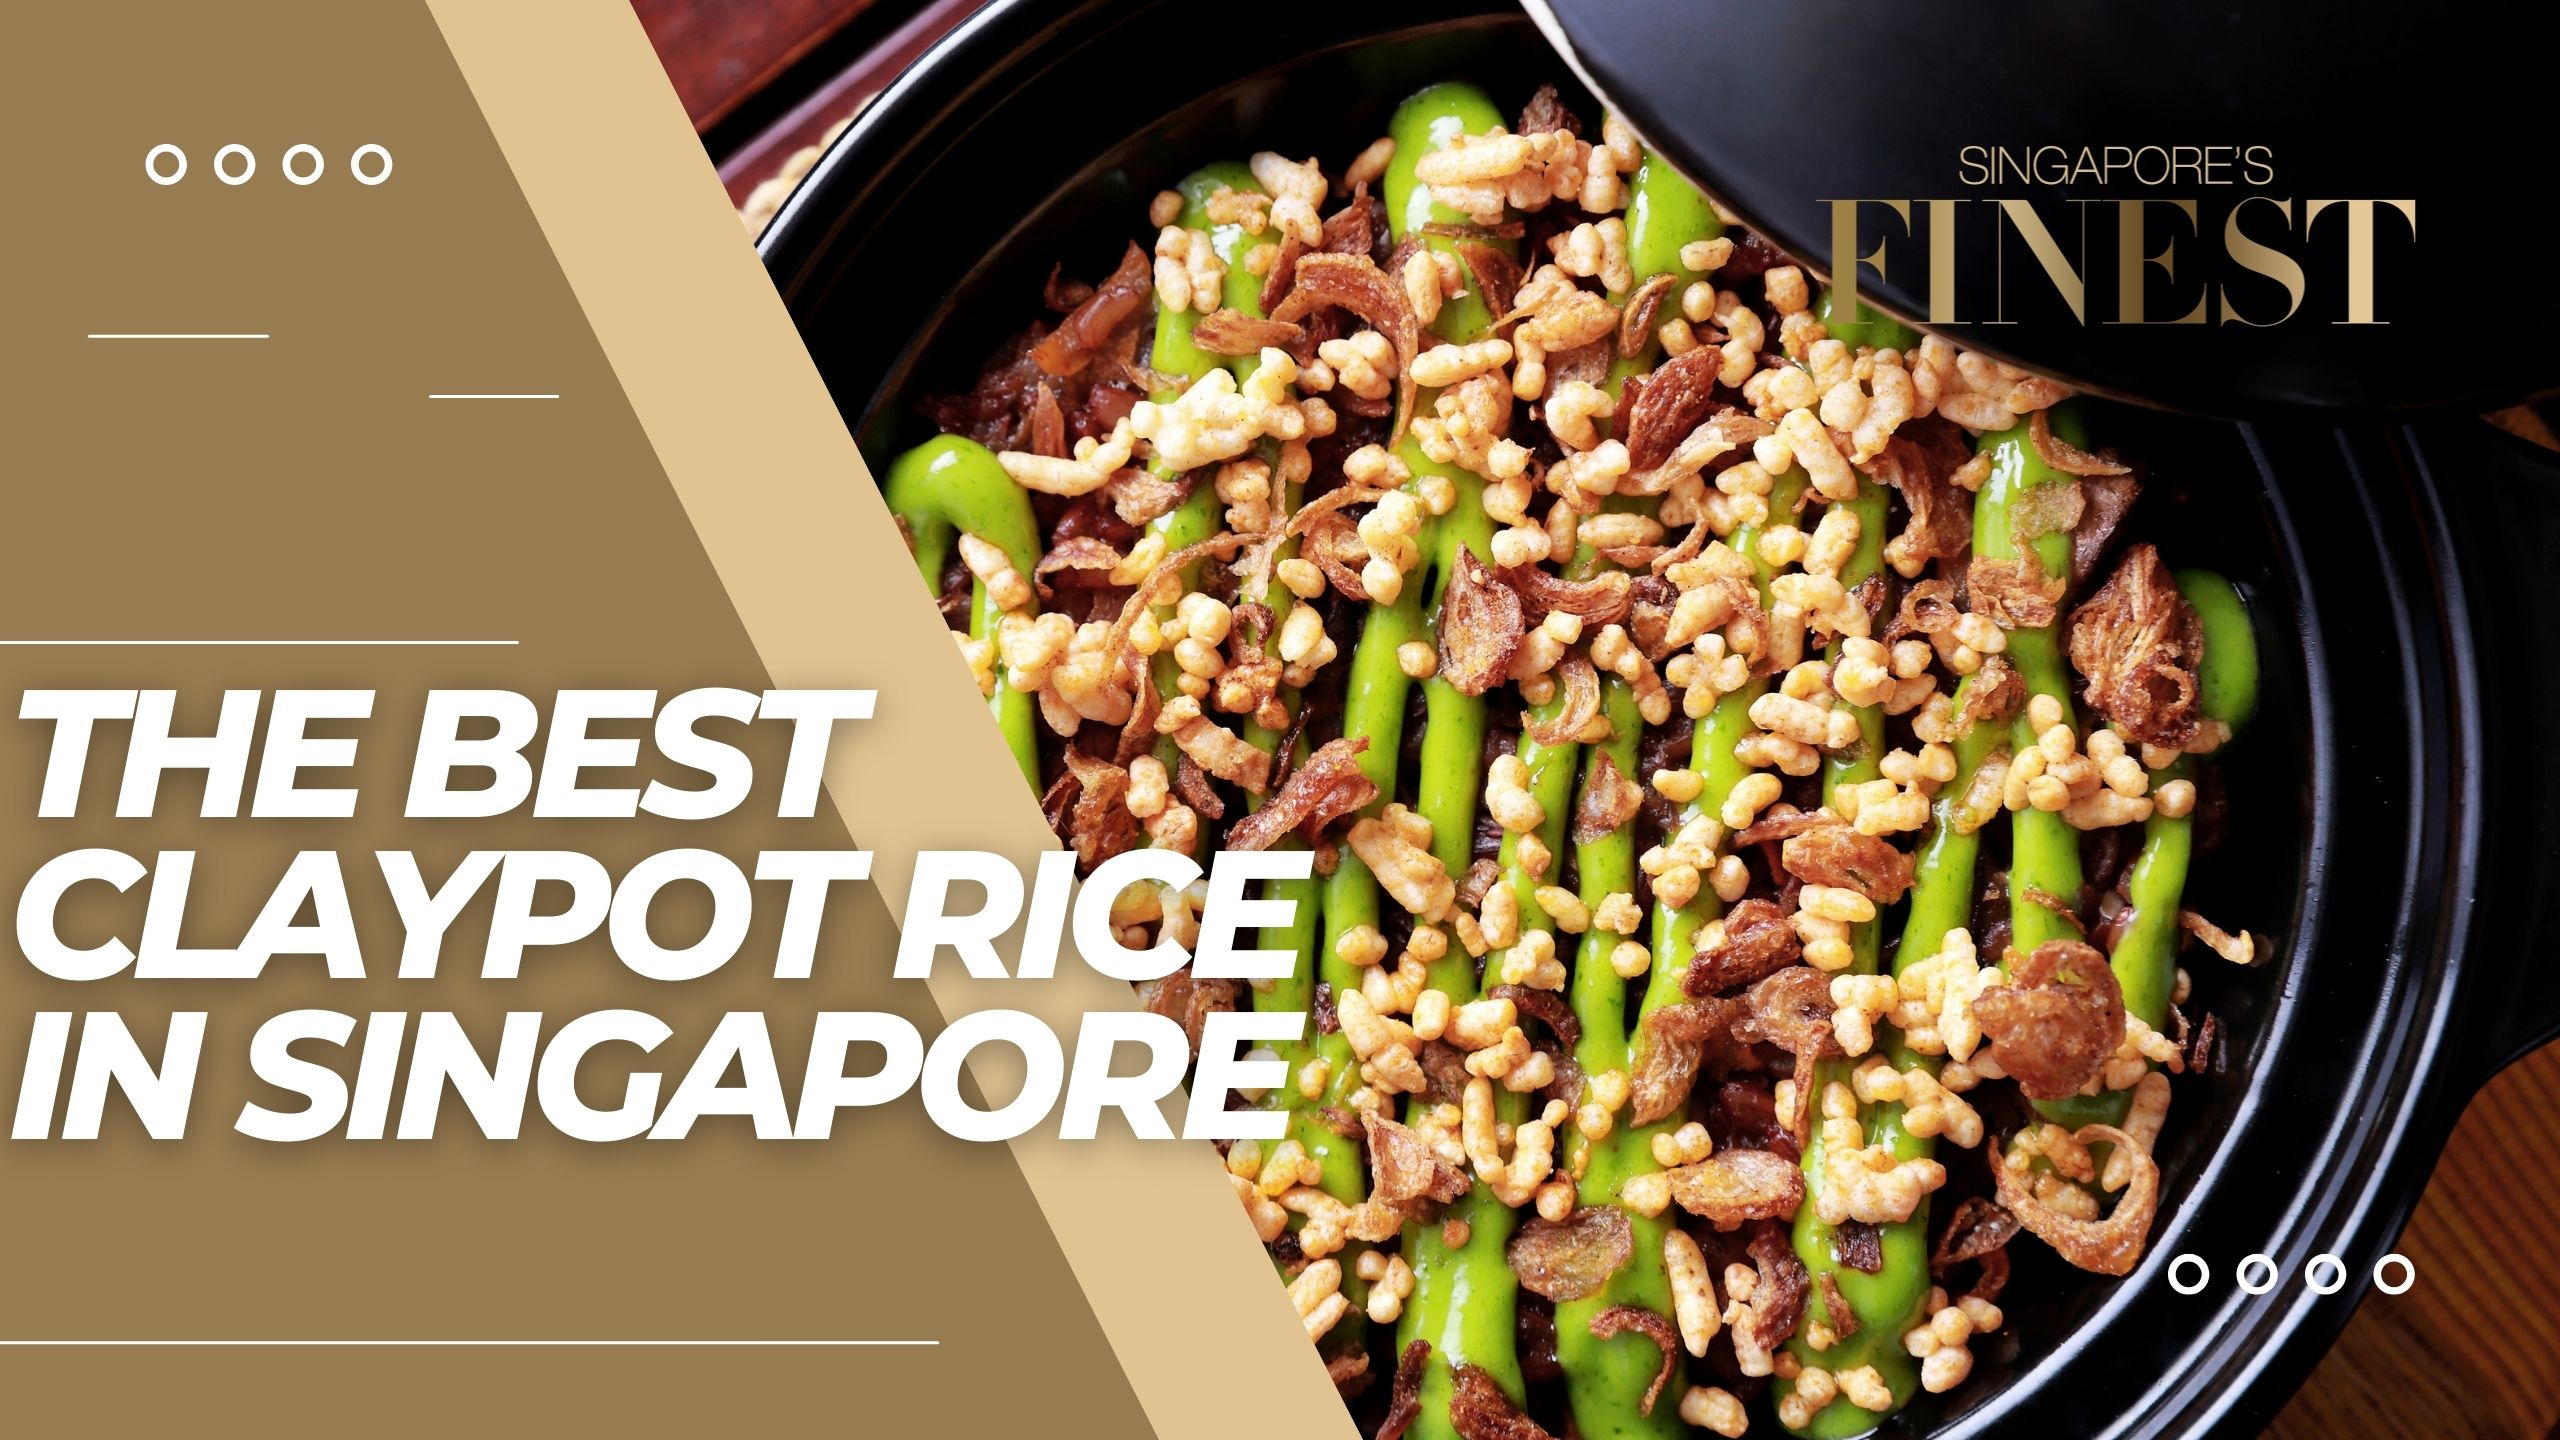 The Finest Claypot Rice in Singapore